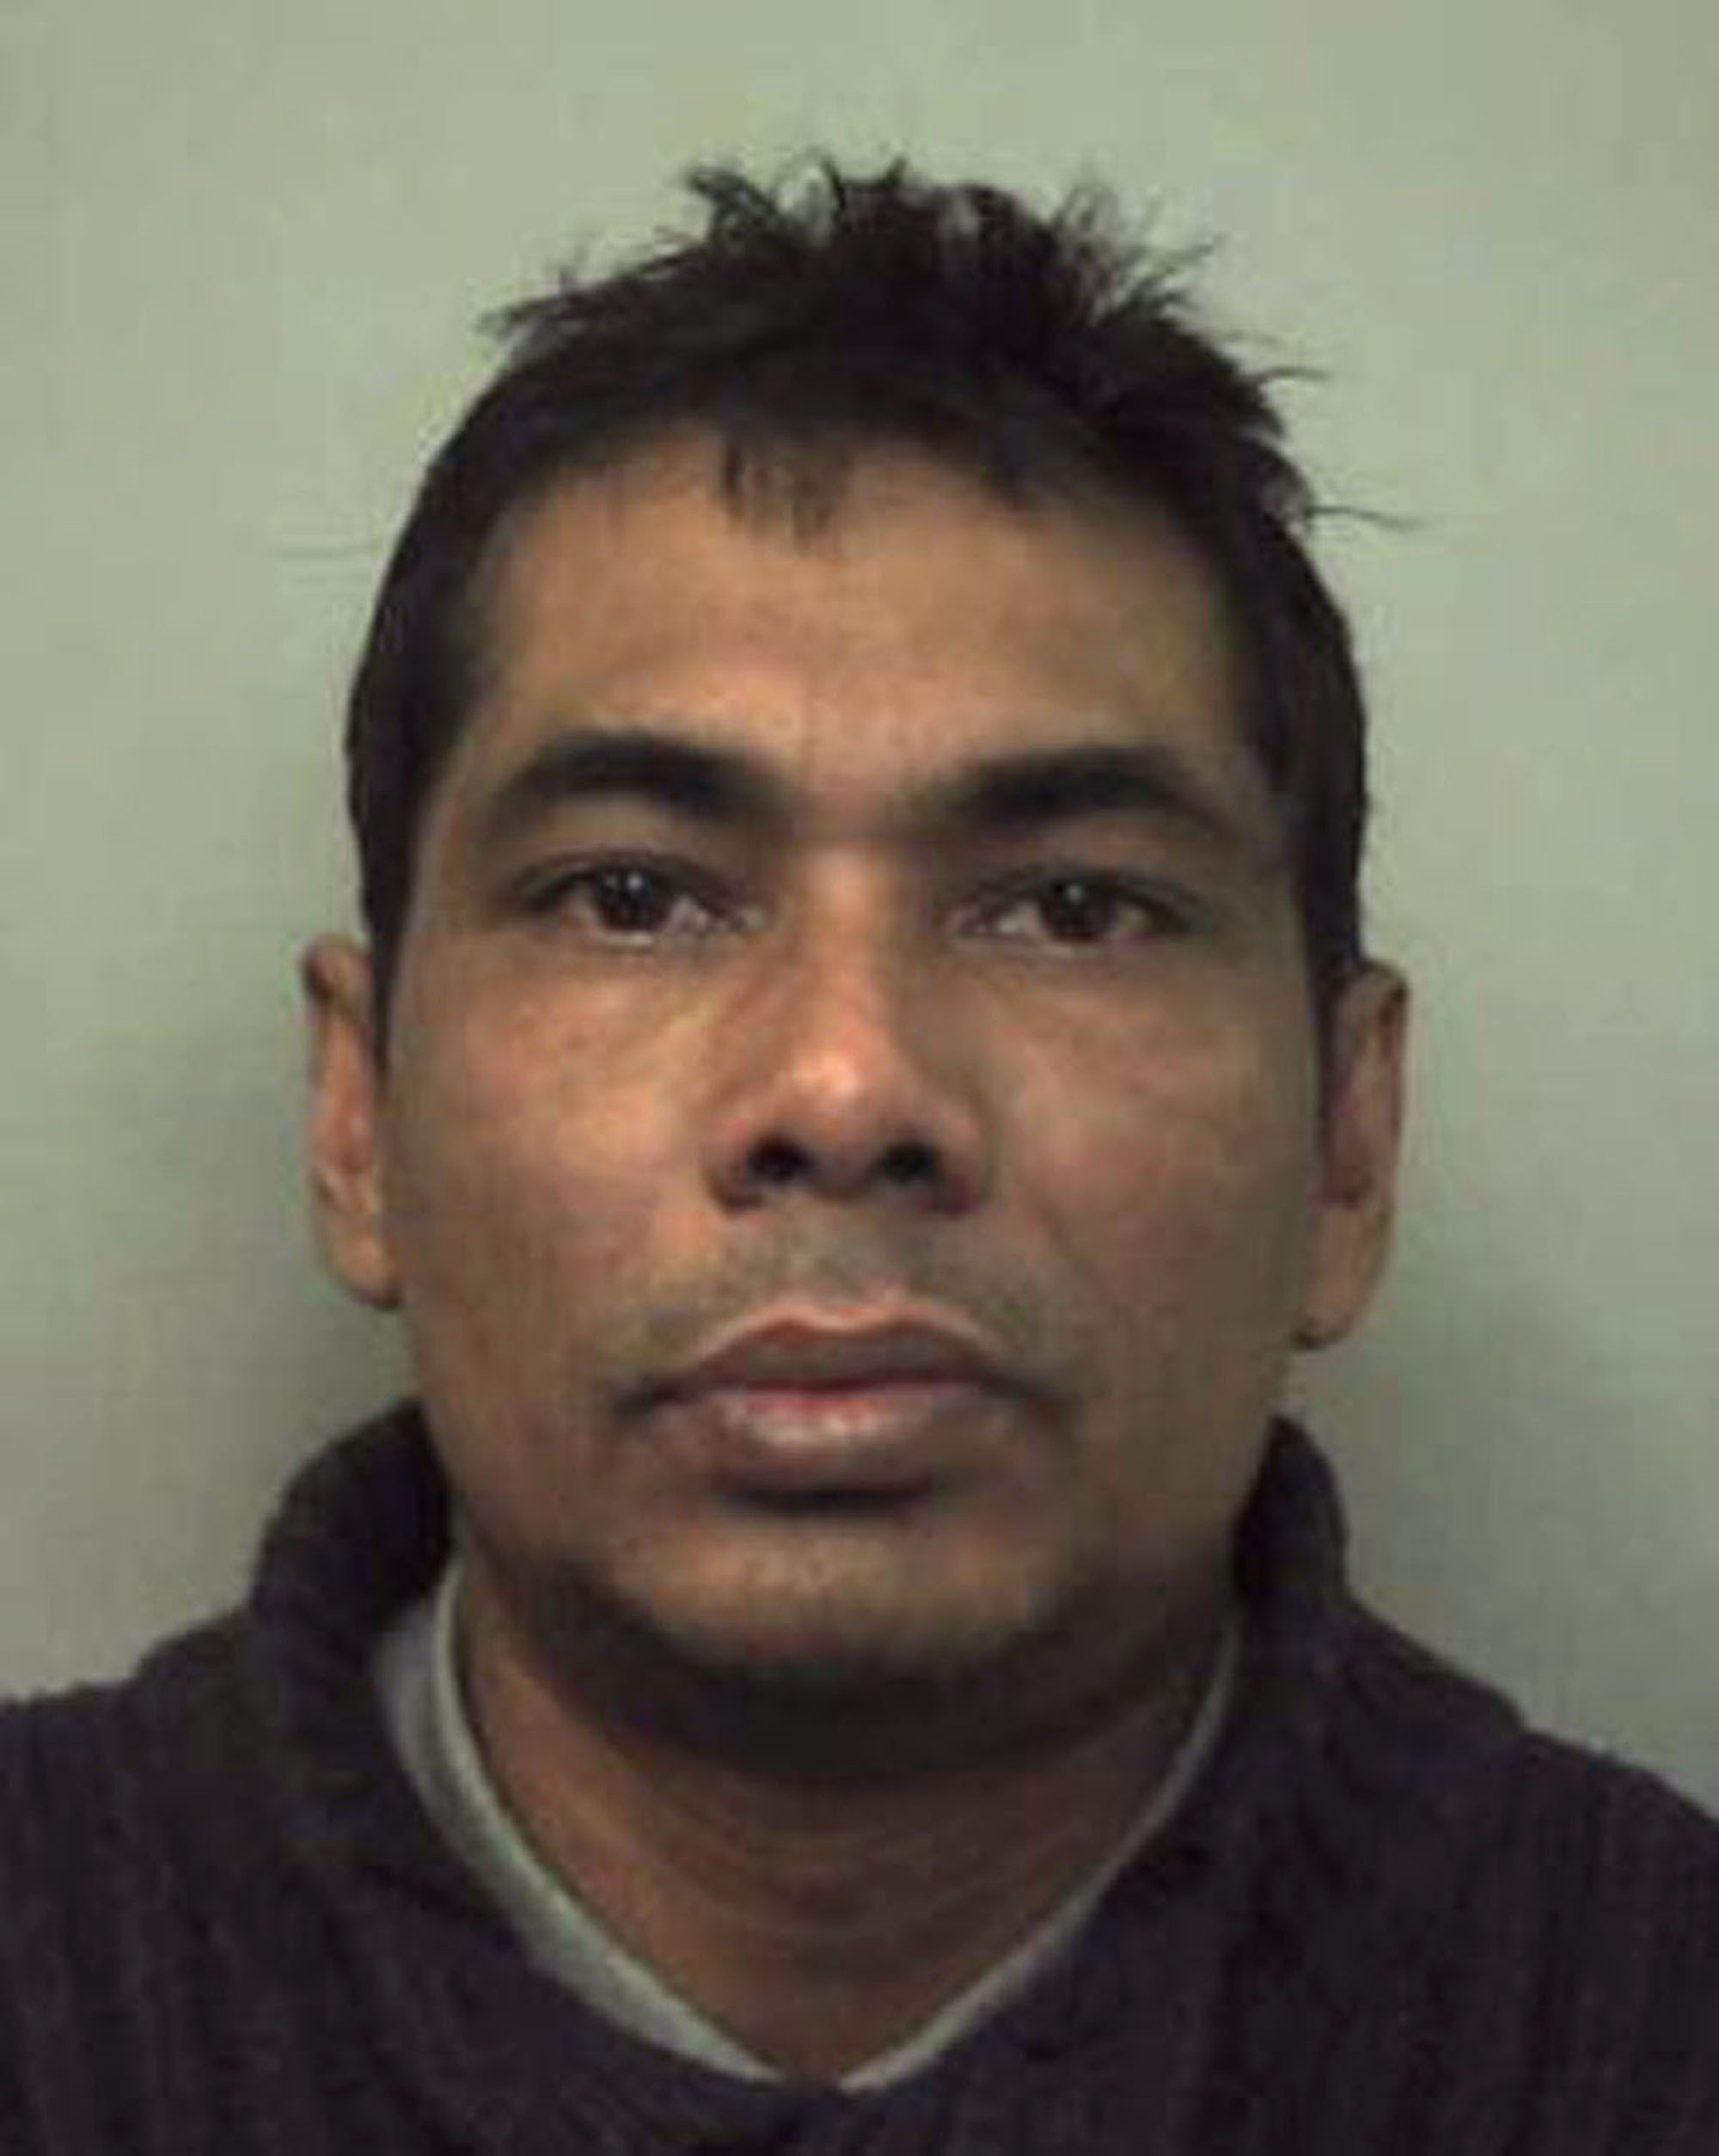 Shahidul Ahmed was found guilty of murder in 2011